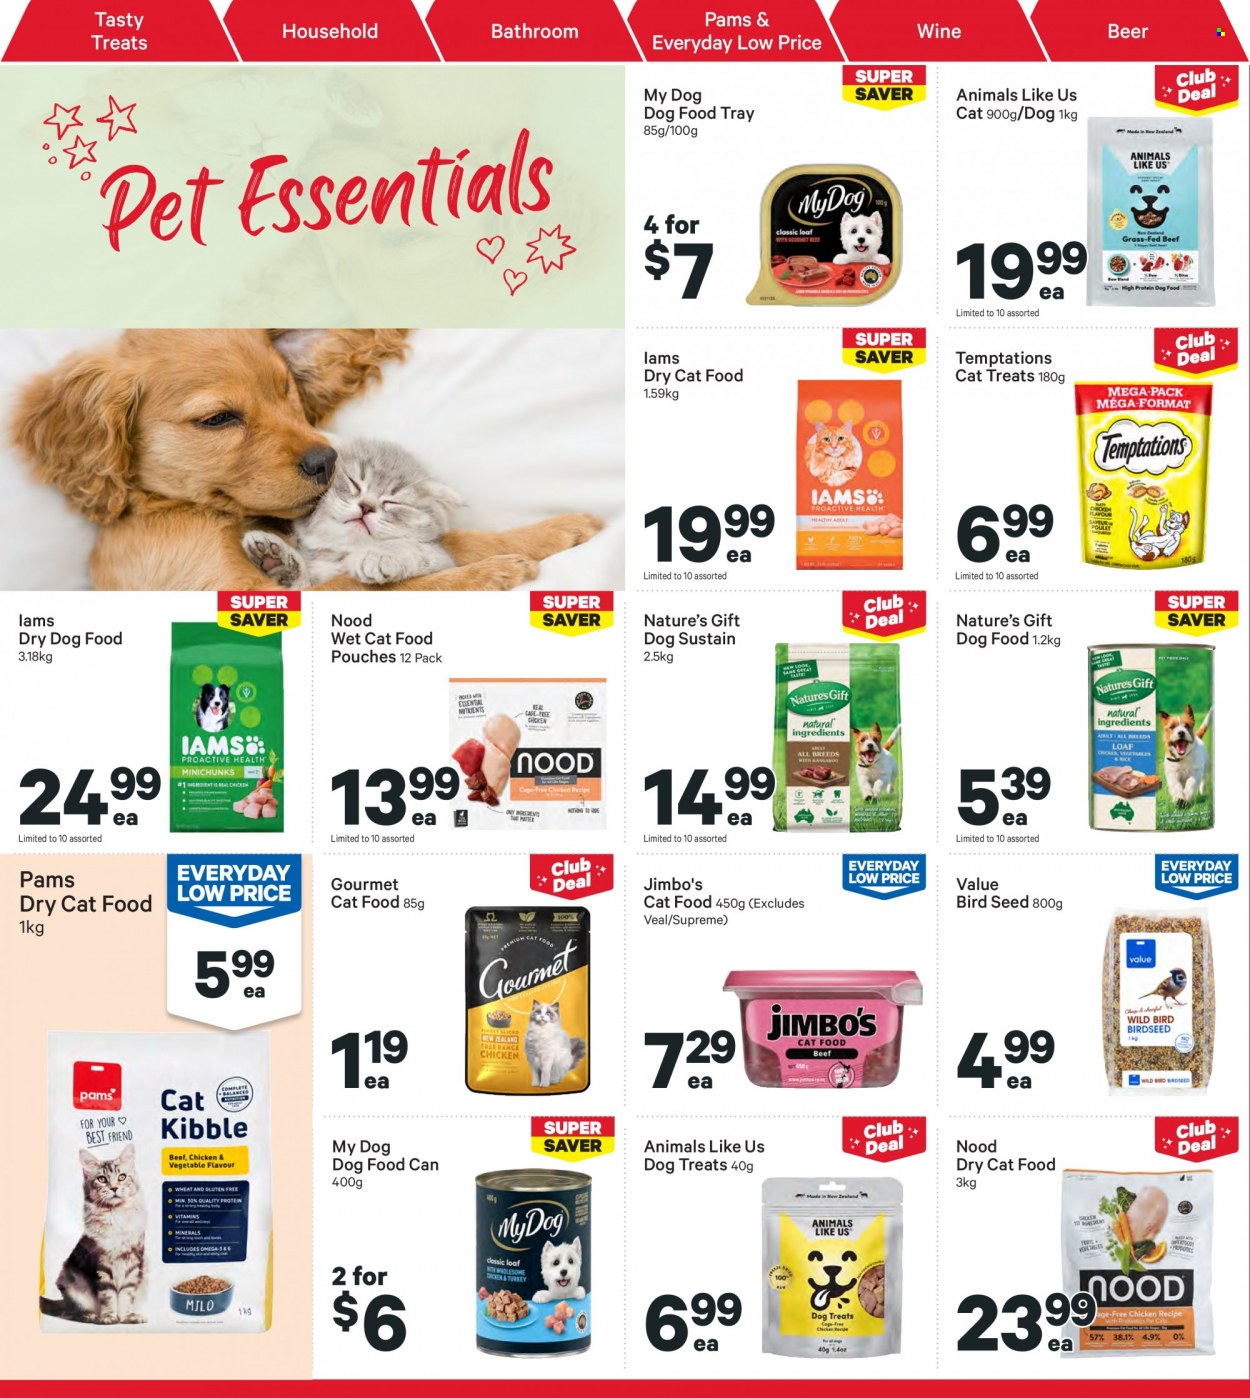 thumbnail - New World mailer - 27.03.2023 - 02.04.2023 - Sales products - Milo, cage free eggs, wine, beer, animal food, dry dog food, bird food, cat food, dog food, dry cat food, Iams, wet cat food, probiotics, Omega-3. Page 32.